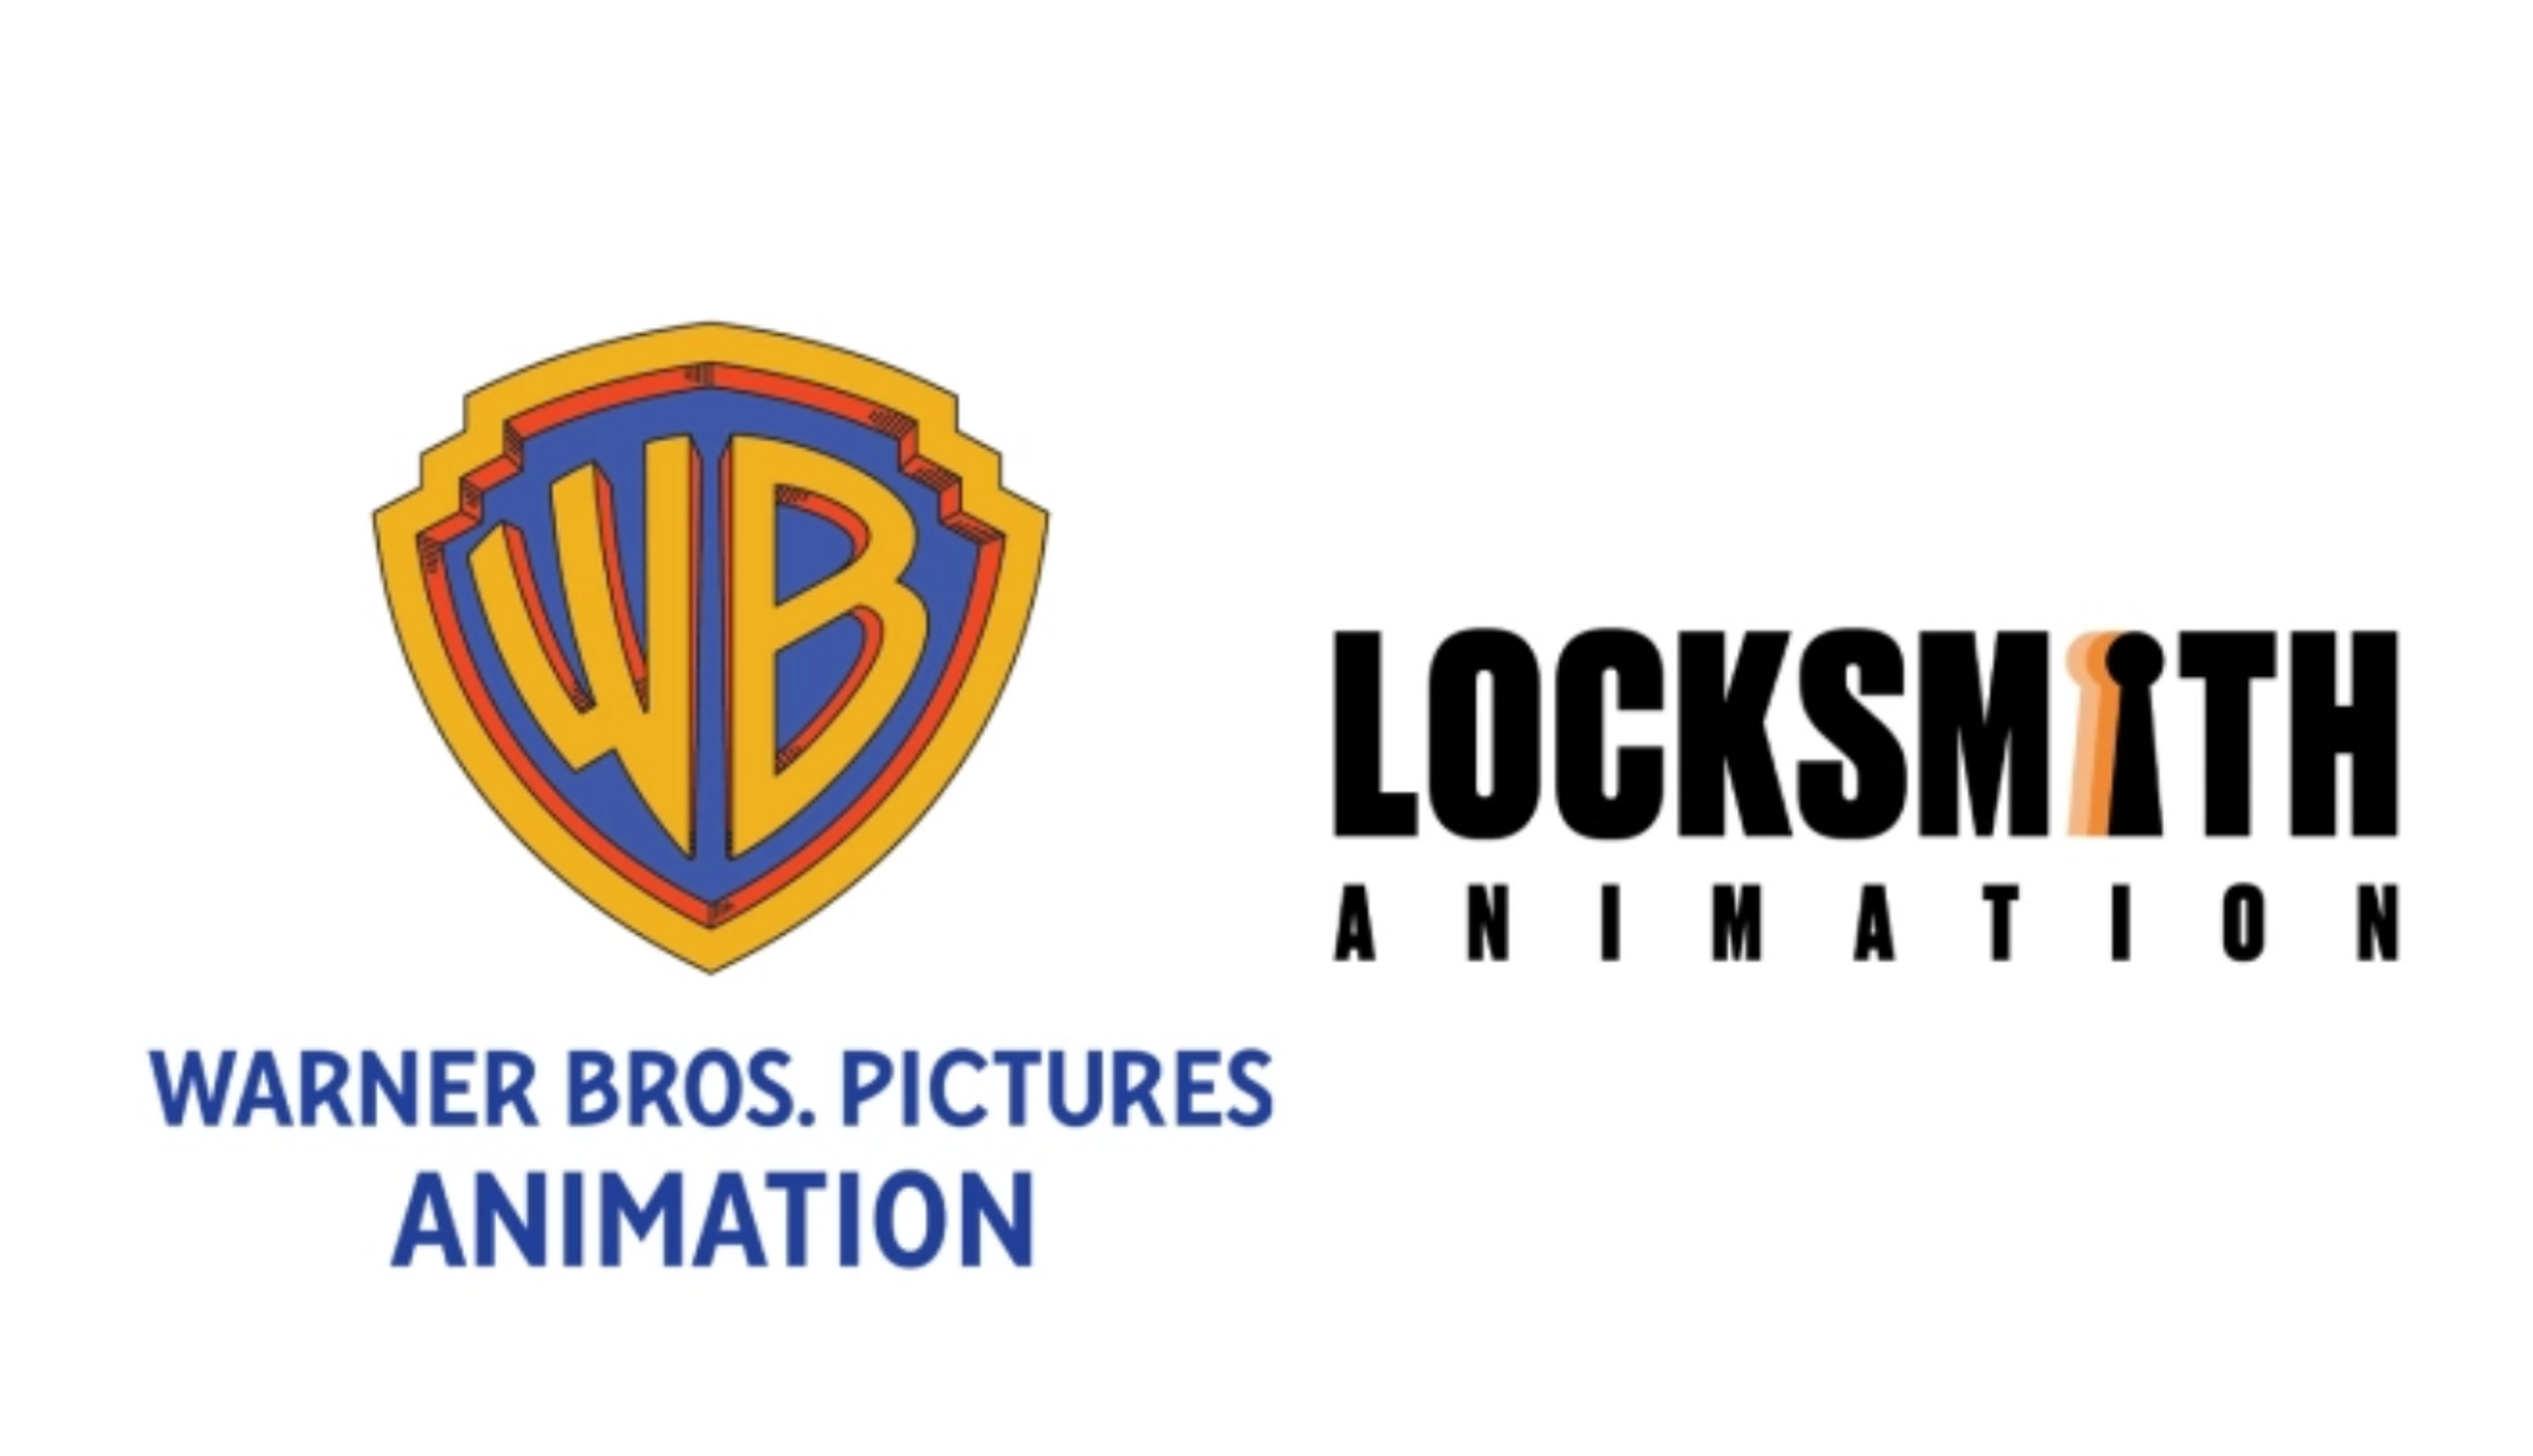 Warner Bros Pictures Animation Inks First-Look Deal With Locksmith  Animation; First Pics Are 'Bad Fairies' & 'The Lunar Chronicles